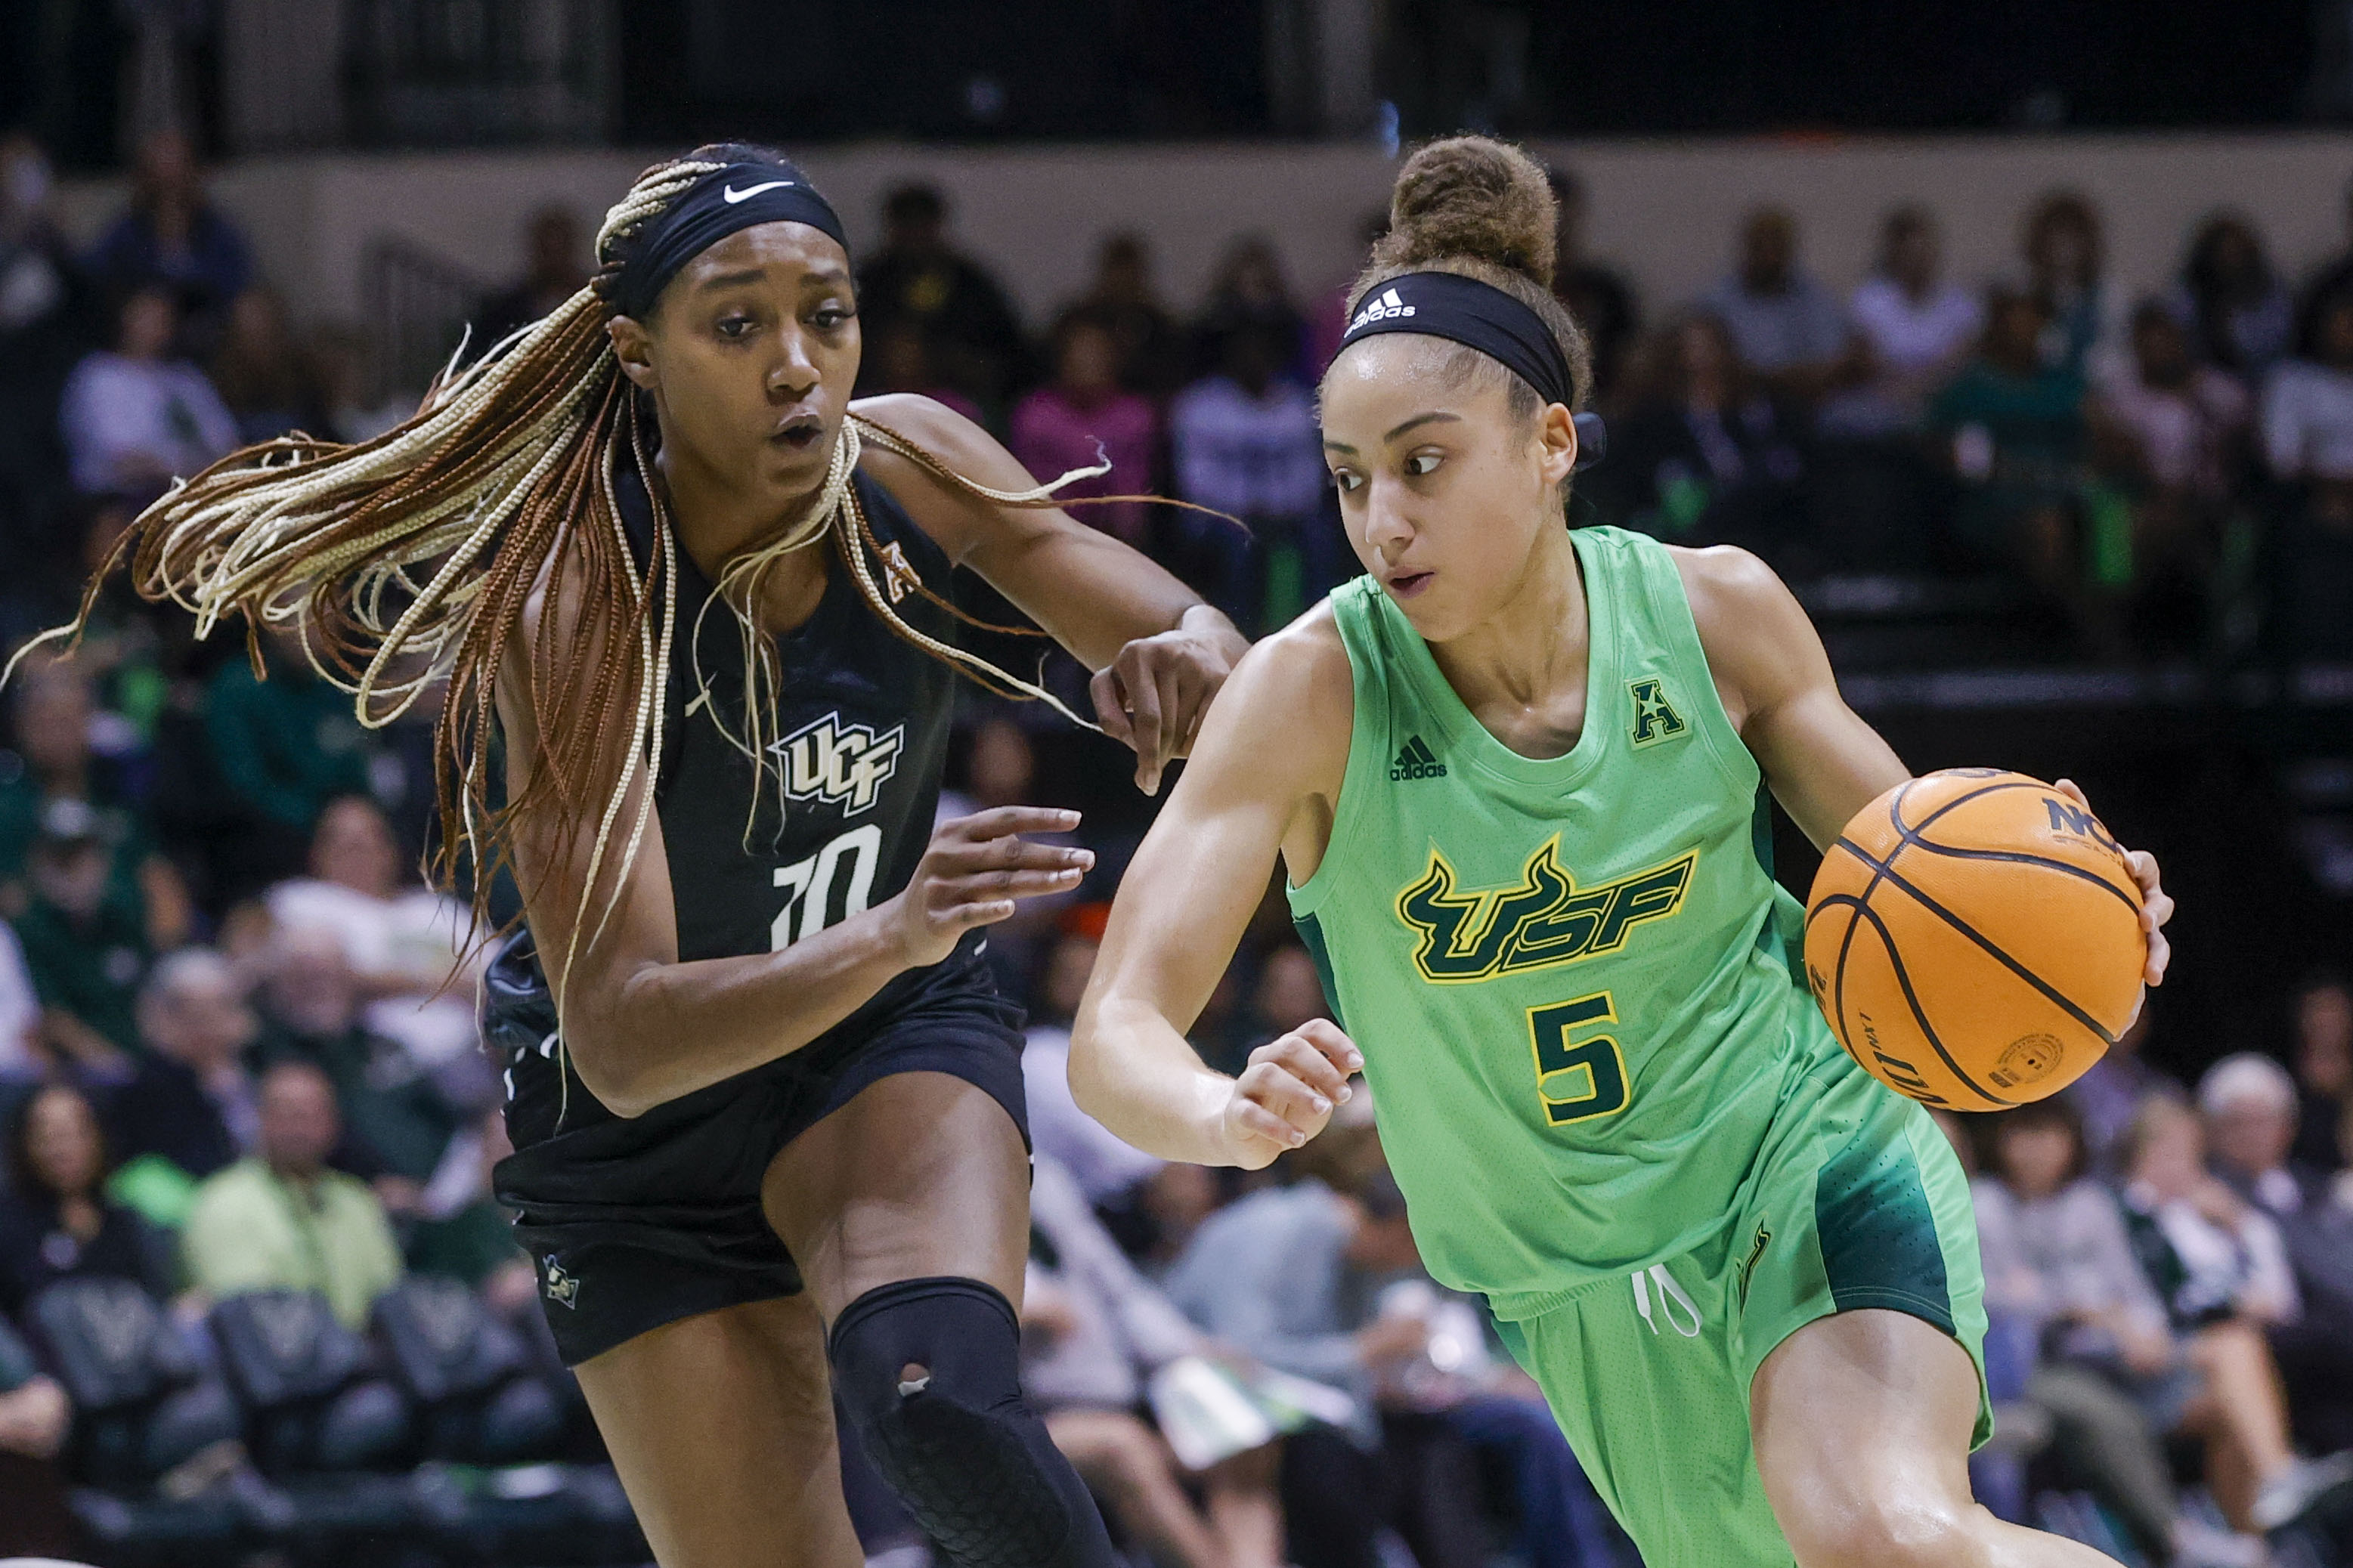 USF's Jessica Dickson Selected In The 2nd Round of WNBA Draft By